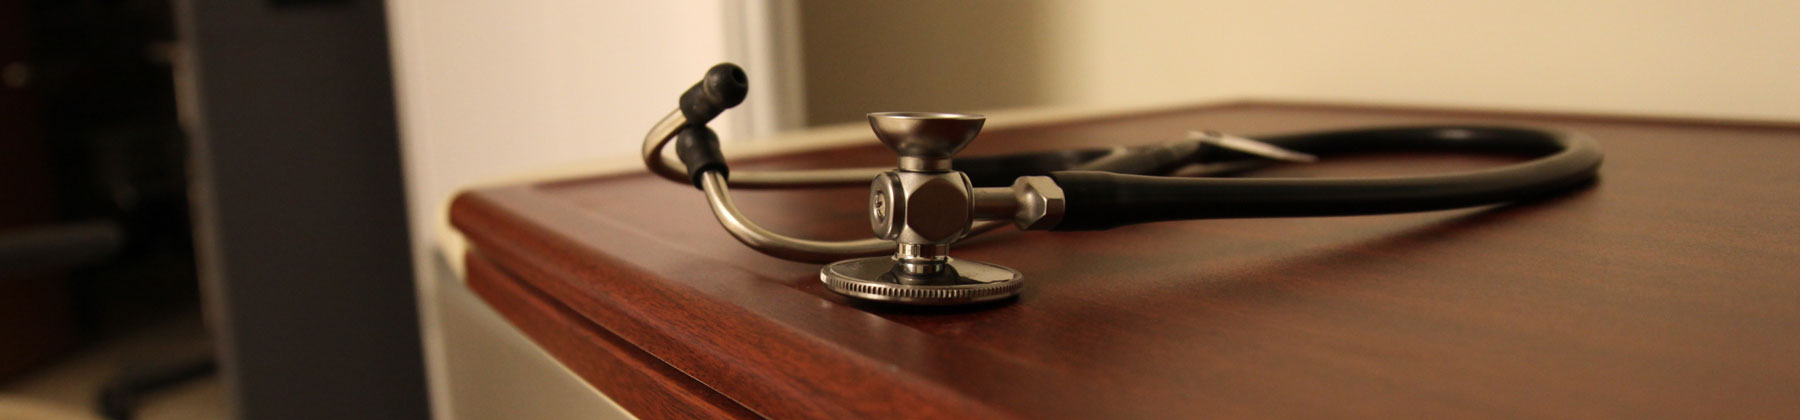 stethoscope laying on doctor's table